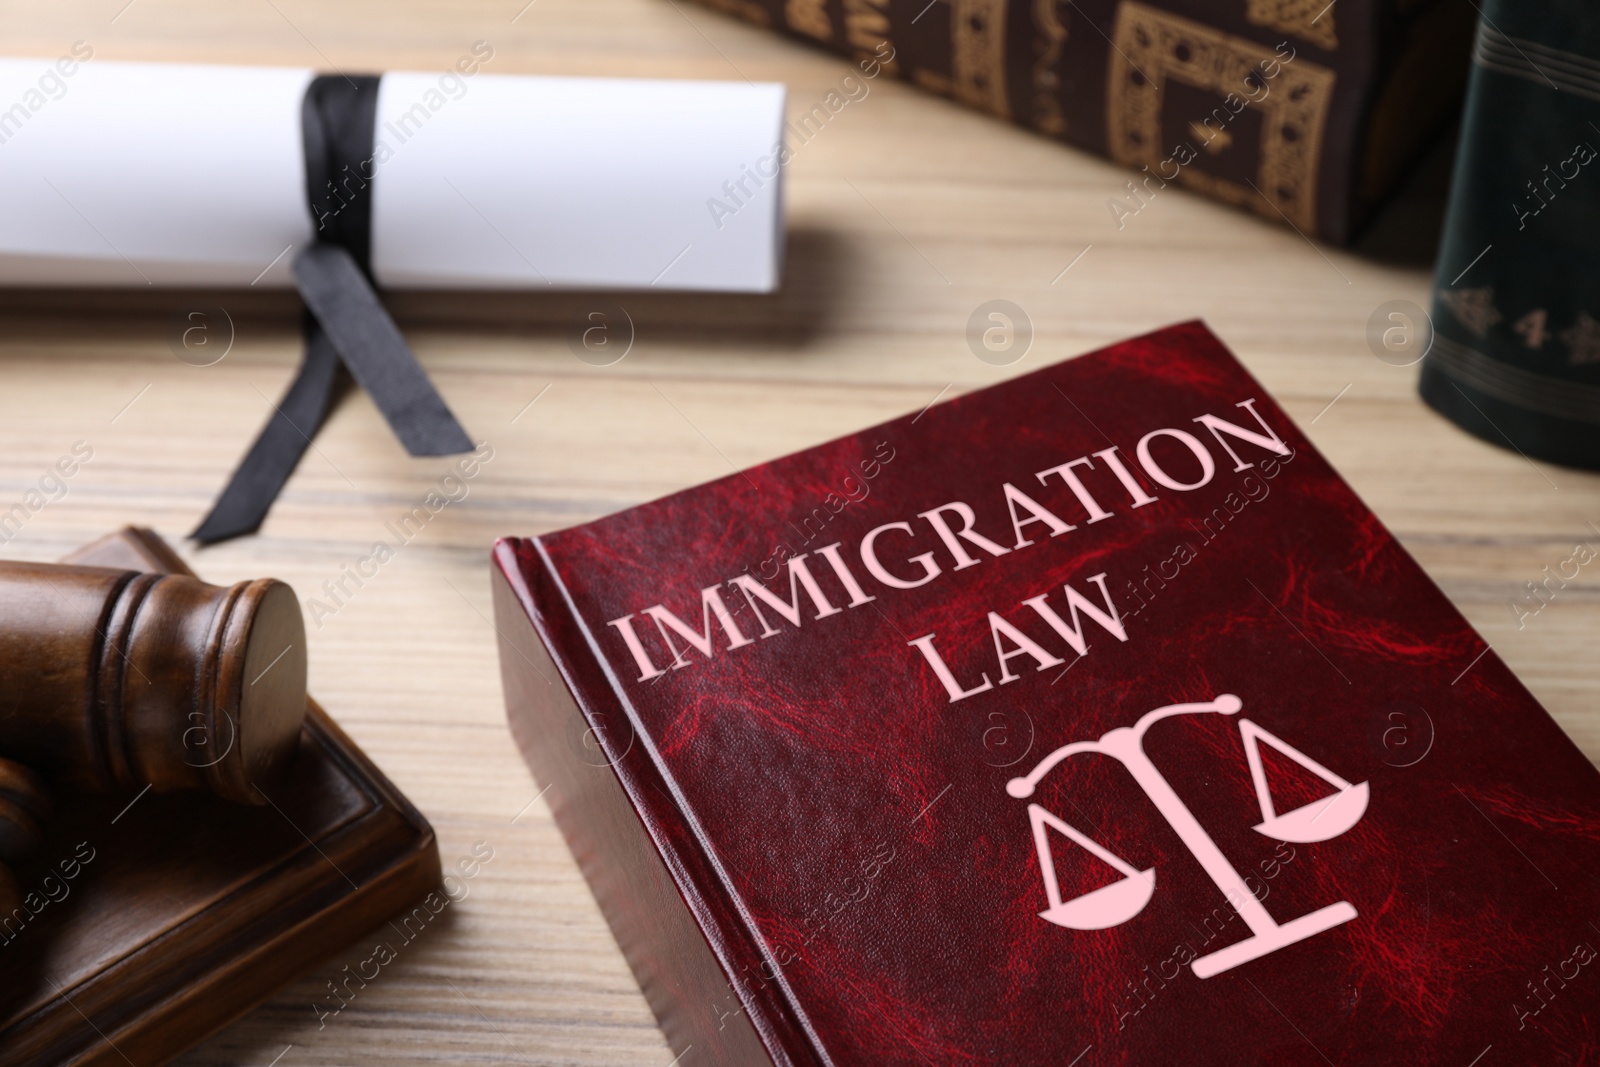 Image of Immigration law book and gavel on wooden table